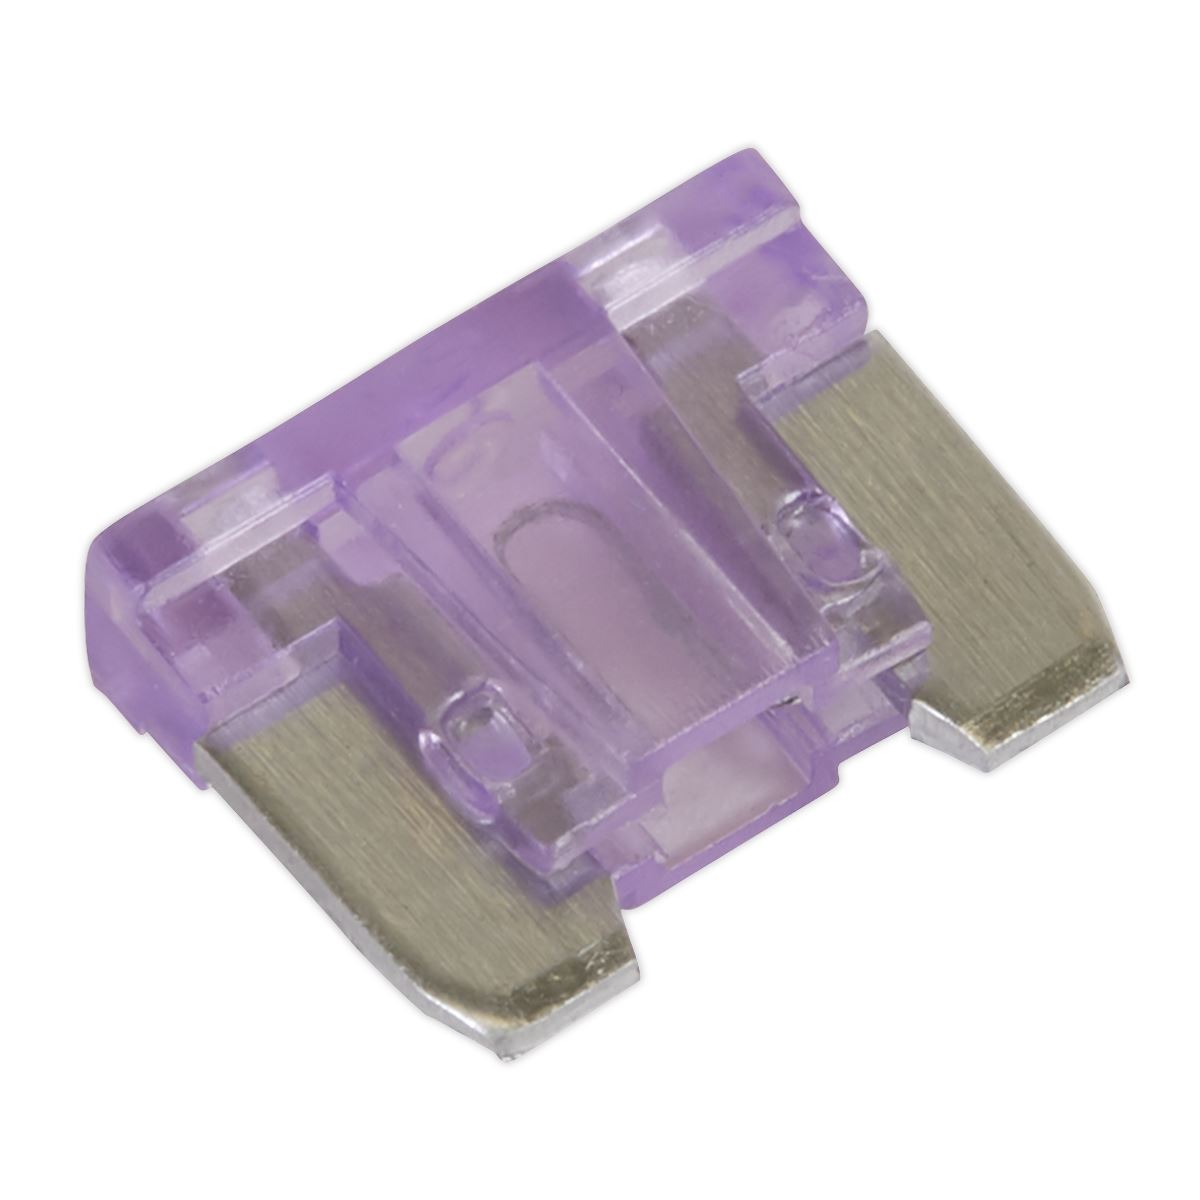 Sealey Automotive MICRO Blade Fuse 3A - Pack of 50